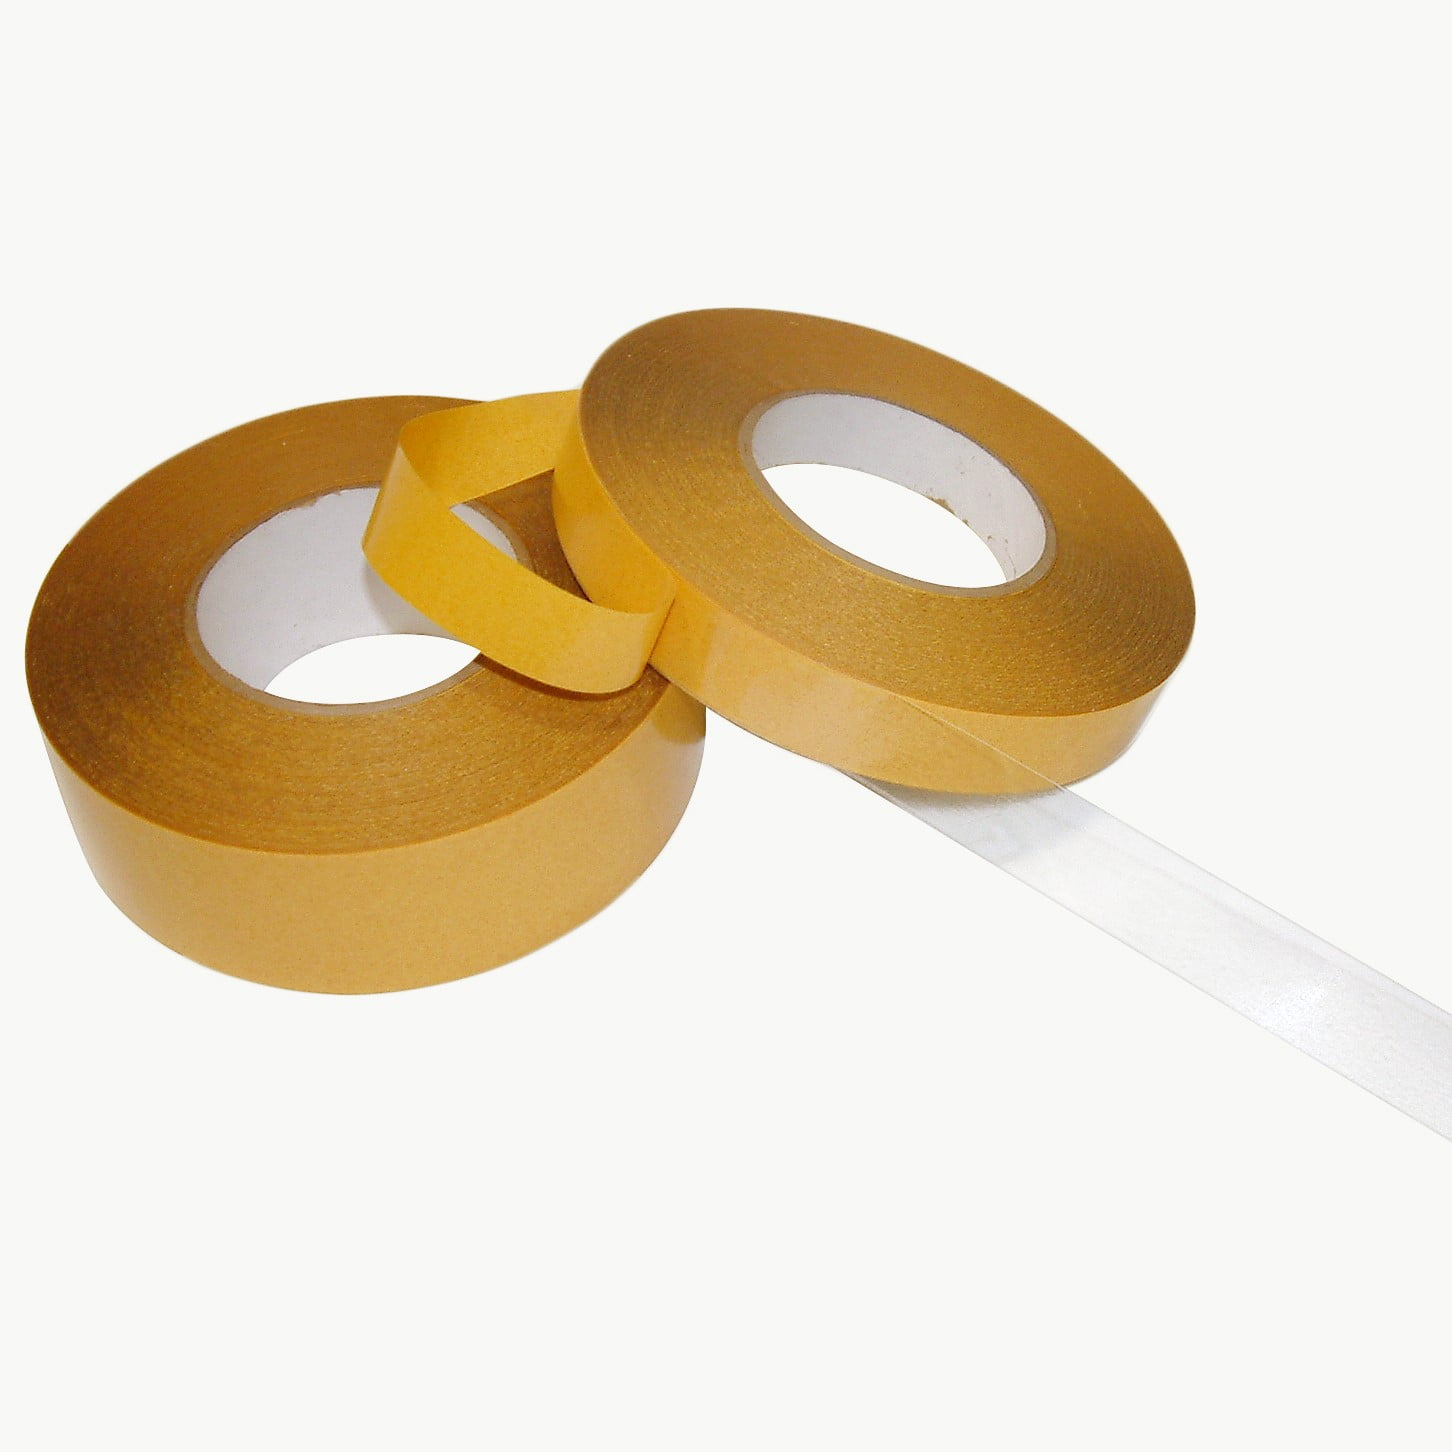 Natural Contractors Grade Masking Tape 2"x50m 1 Case / 24 Rolls / $2.39 Roll 